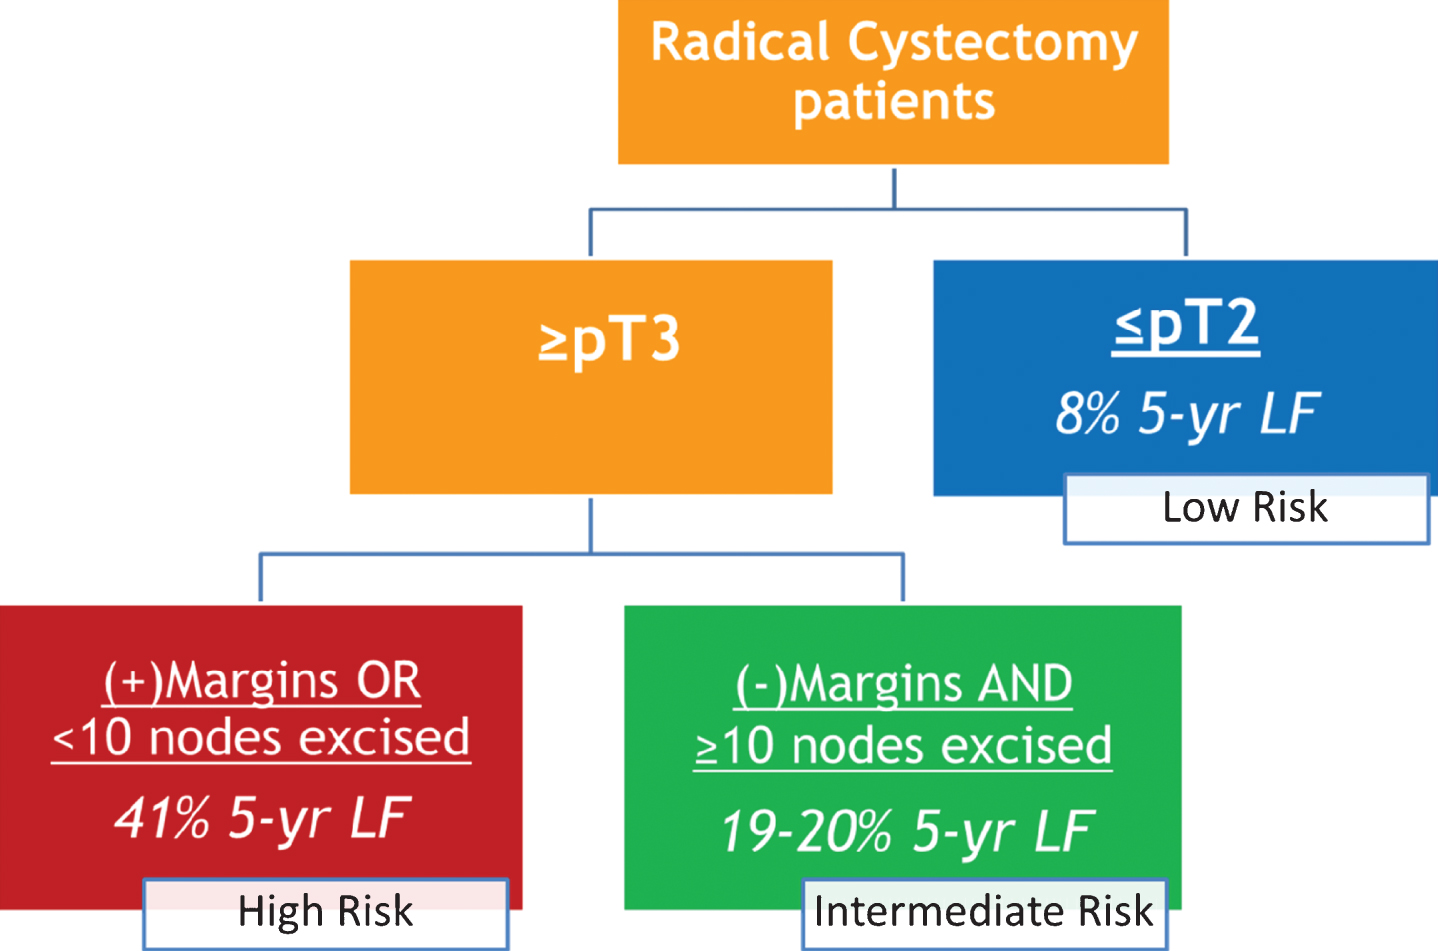 PENN risk stratification for predicting local-regional recurrence after radical cystectomy.